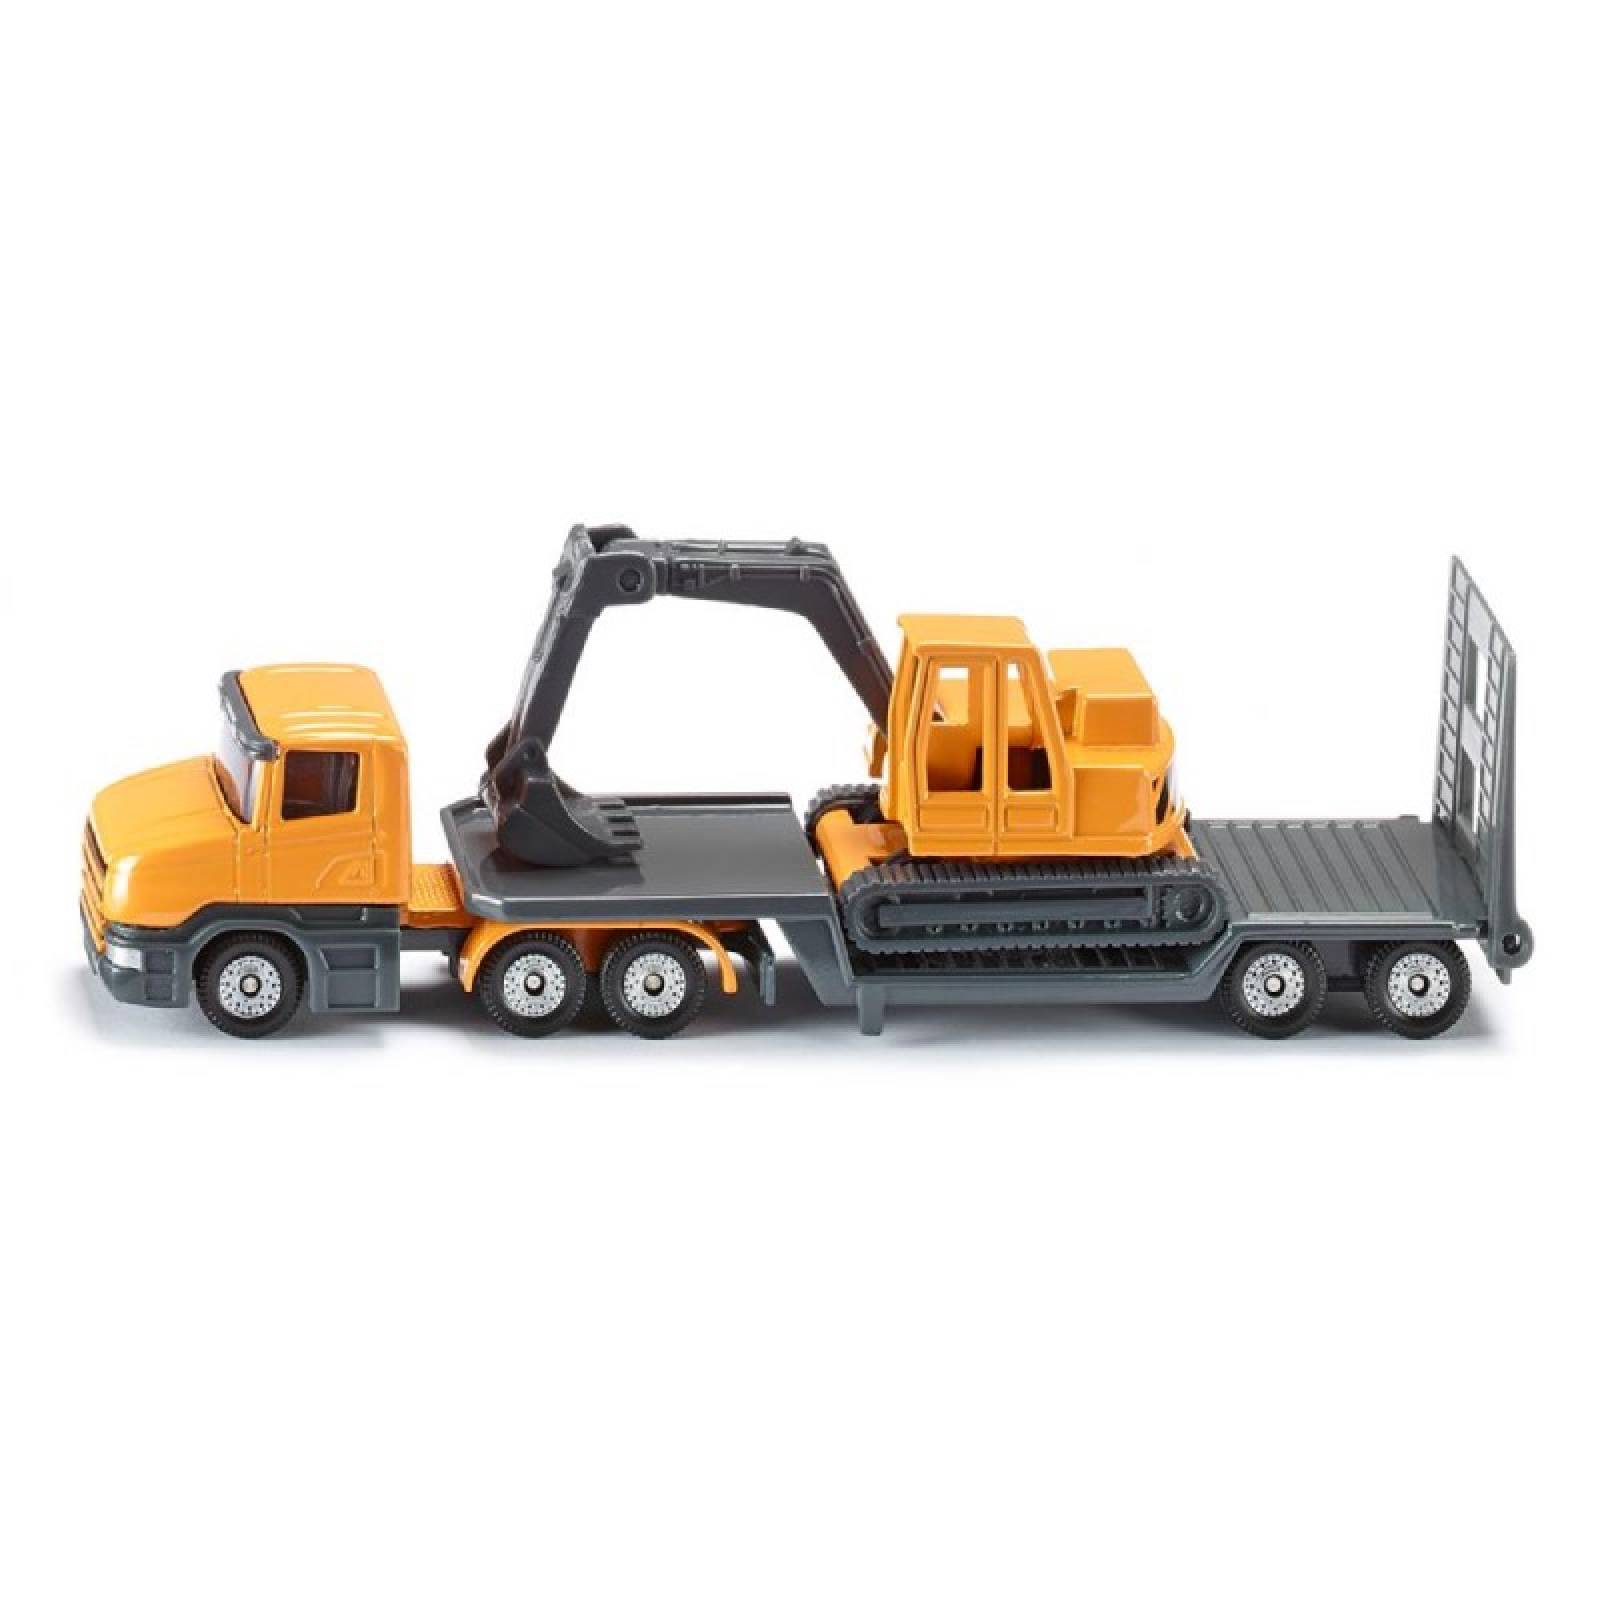 Low loader With Excavator - Double Die-Cast Toy Vehicle 1611 3+